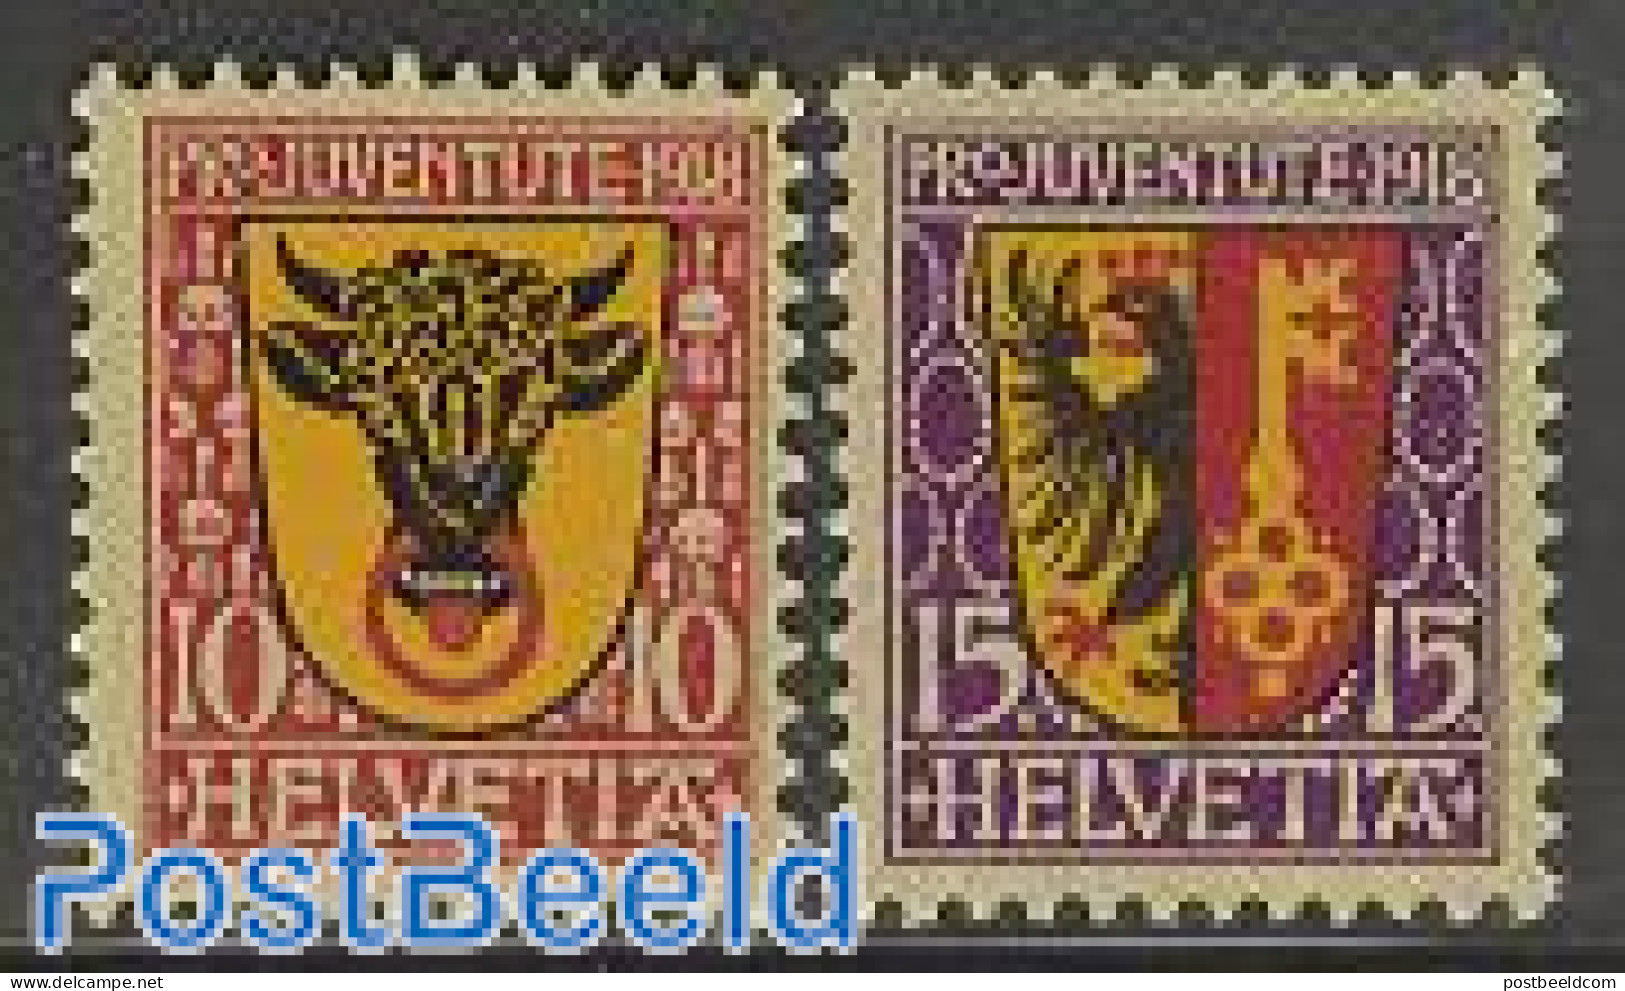 Switzerland 1918 Pro Juventute 2v, Mint NH, History - Coat Of Arms - Unused Stamps